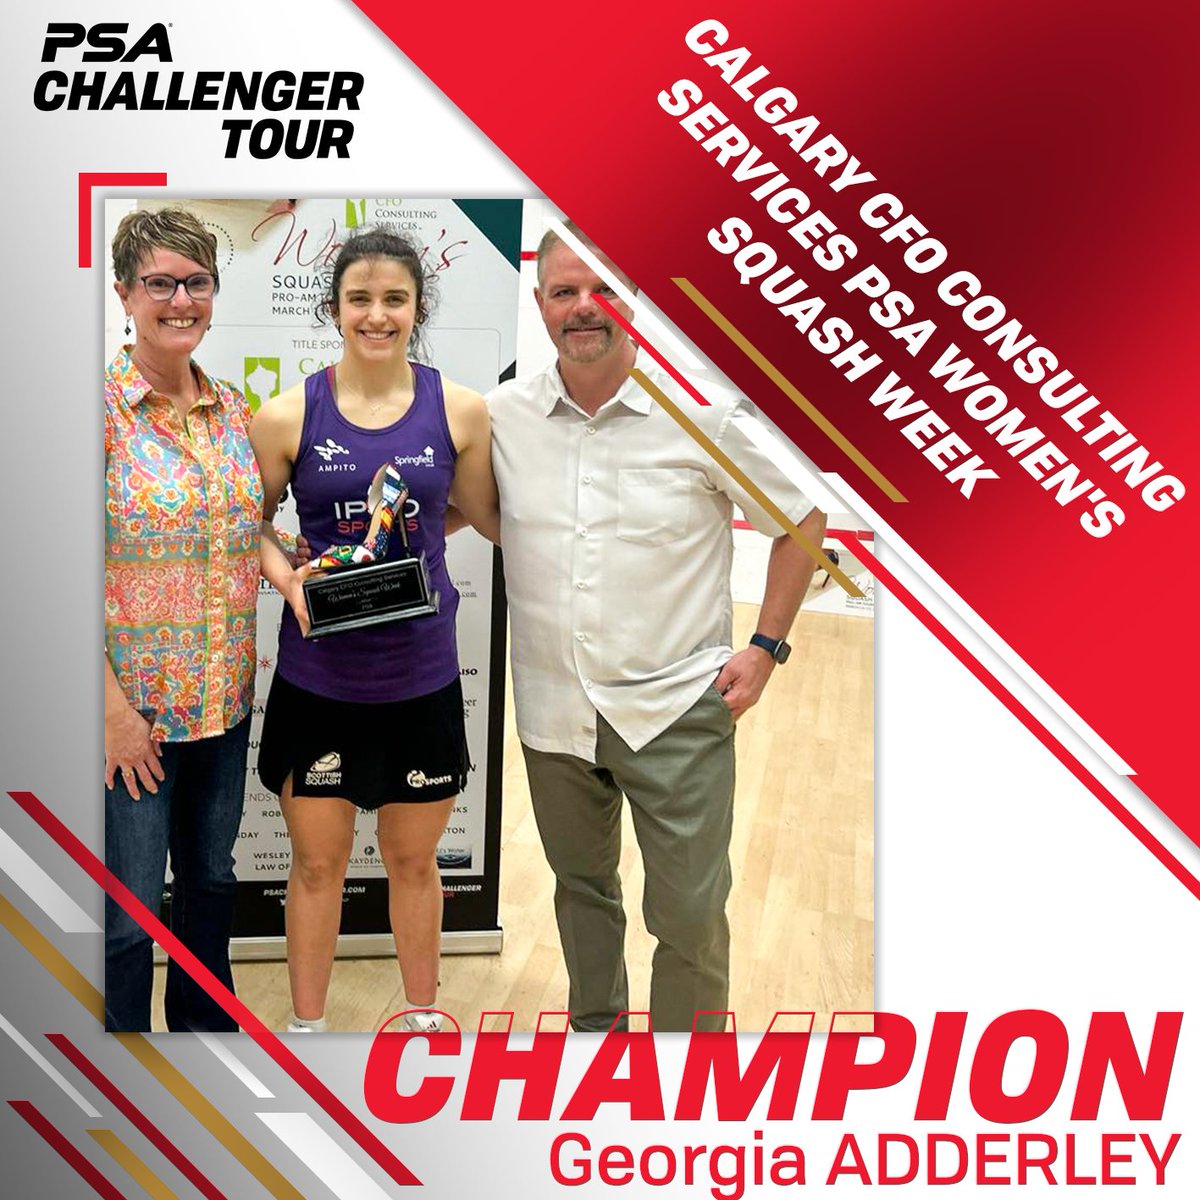 Scottish No.1⃣ @G_Adderley01 claimed the biggest title of her career in Canada yesterday 🙌 The No.2⃣ seed beat Salma Eltayeb in the Calgary CFO Consulting Services PSA Women's Squash Week final to clinch her first 20K crown 👑 Read more 👇 psaworldtour.com/challenger-tou…